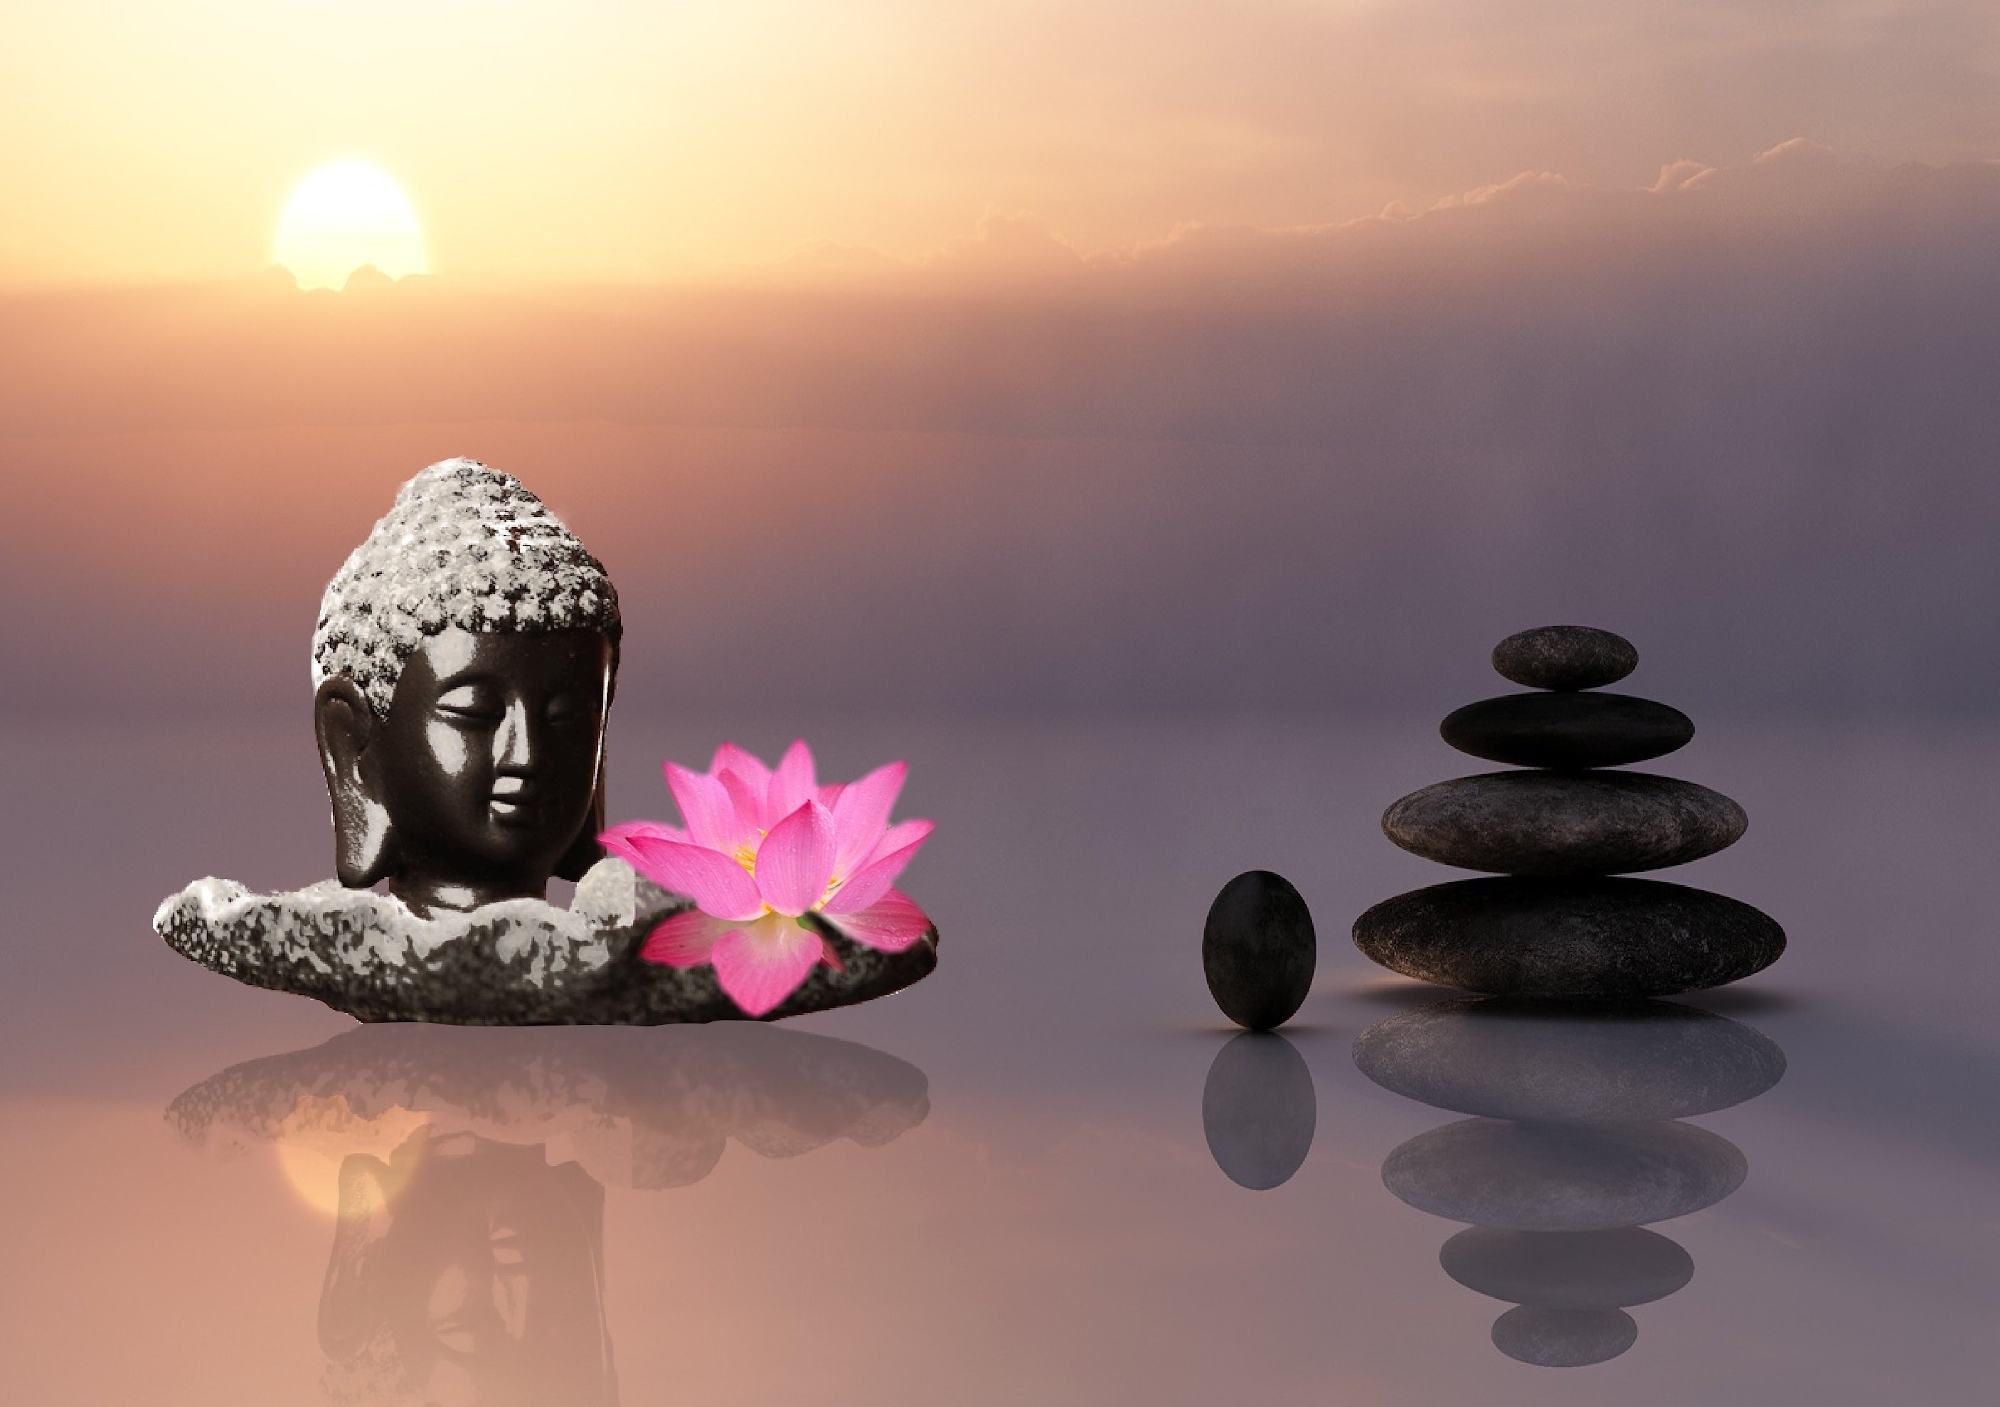 Image of Bhudda statue flower and stone pile showing serenity